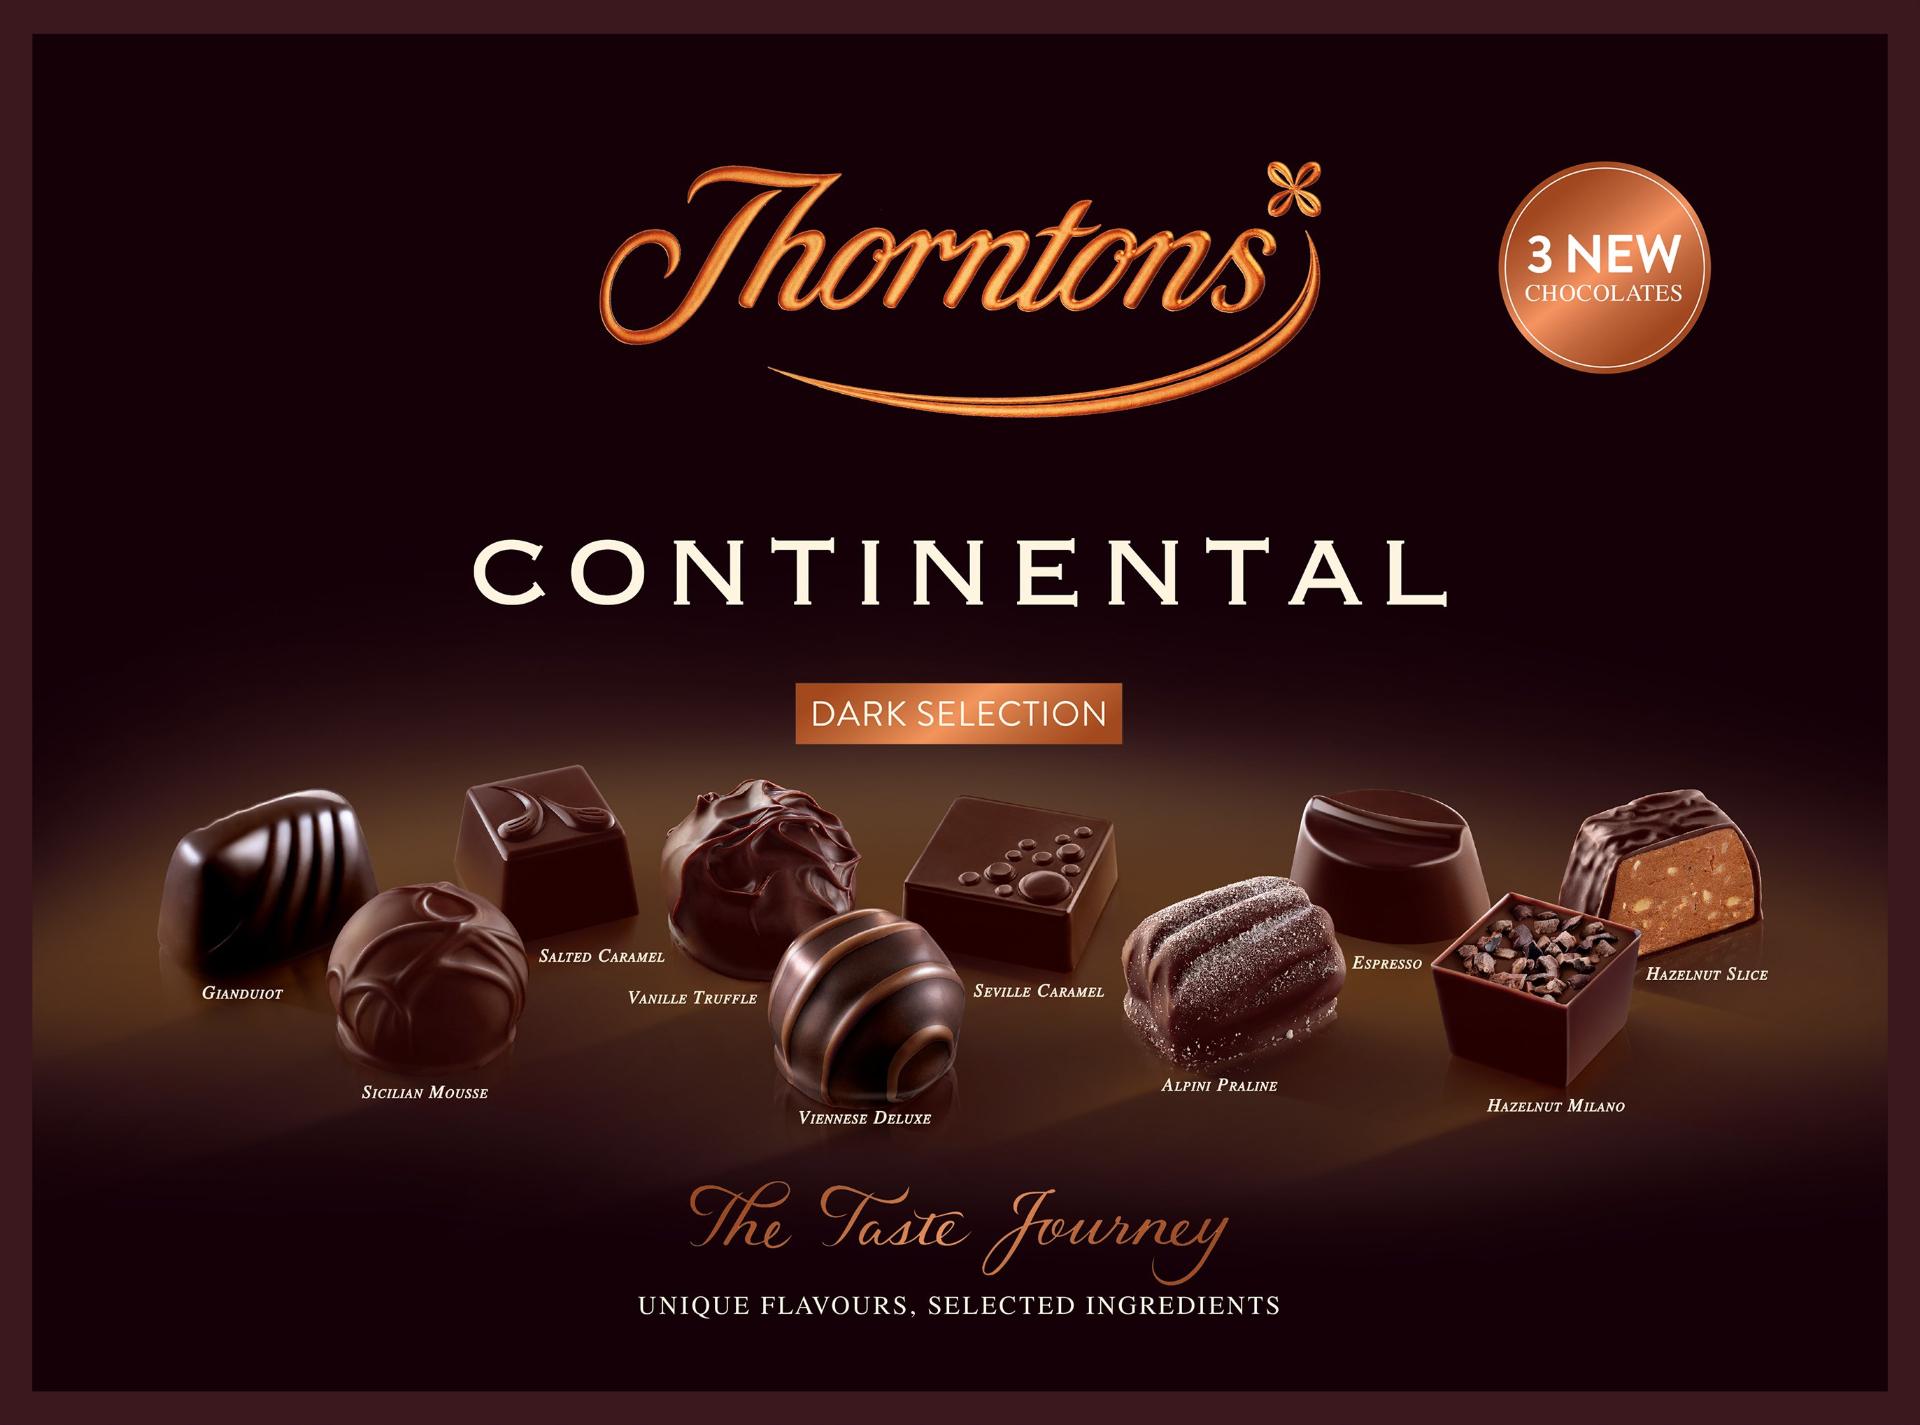 Thorntons announces closure of all UK stores